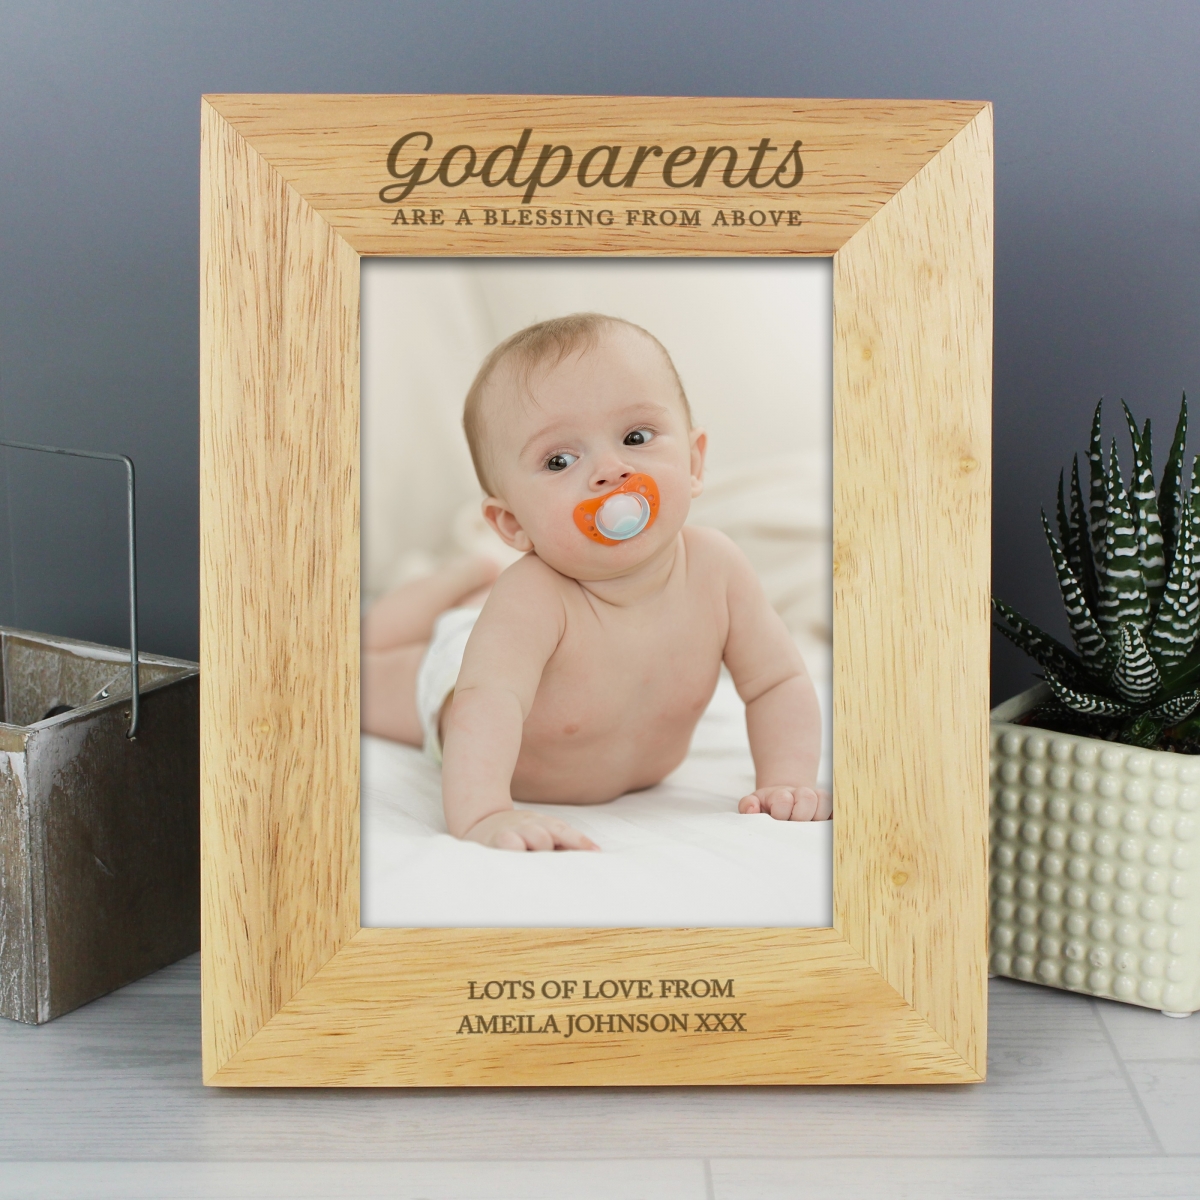 Personalised Godparents 7x5 Wooden Photo Frame